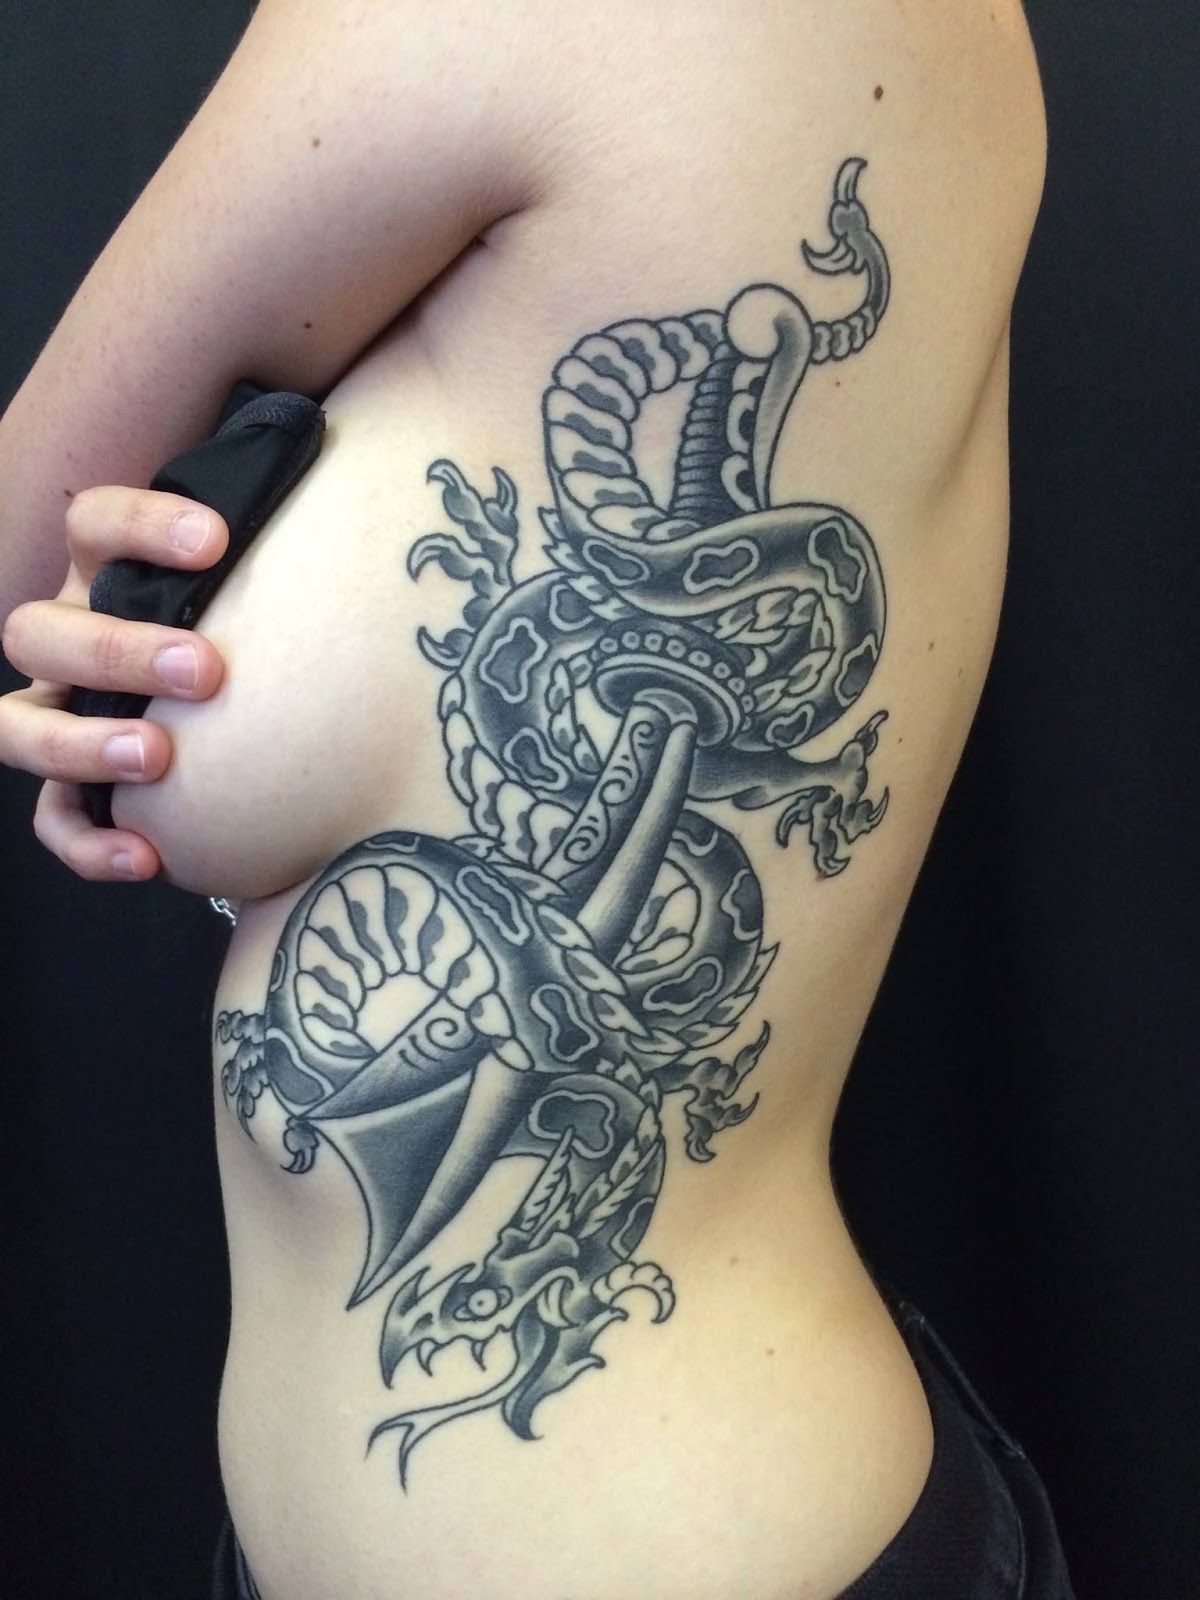 Side Arm Girl Tattoo Cool And Awesome